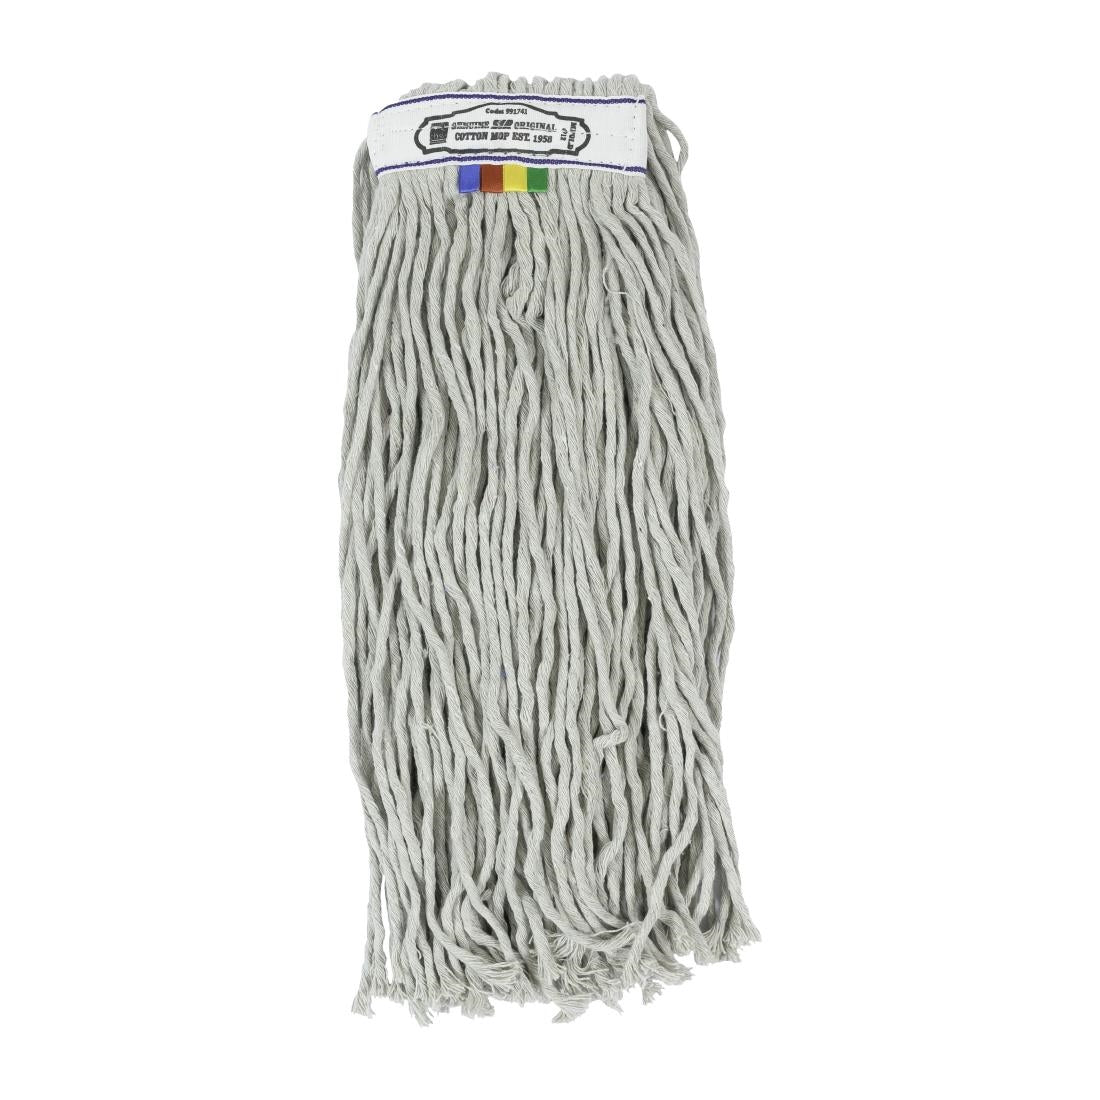 FT390 SYR Traditional Multifold Cotton Kentucky Mop Head 12oz JD Catering Equipment Solutions Ltd